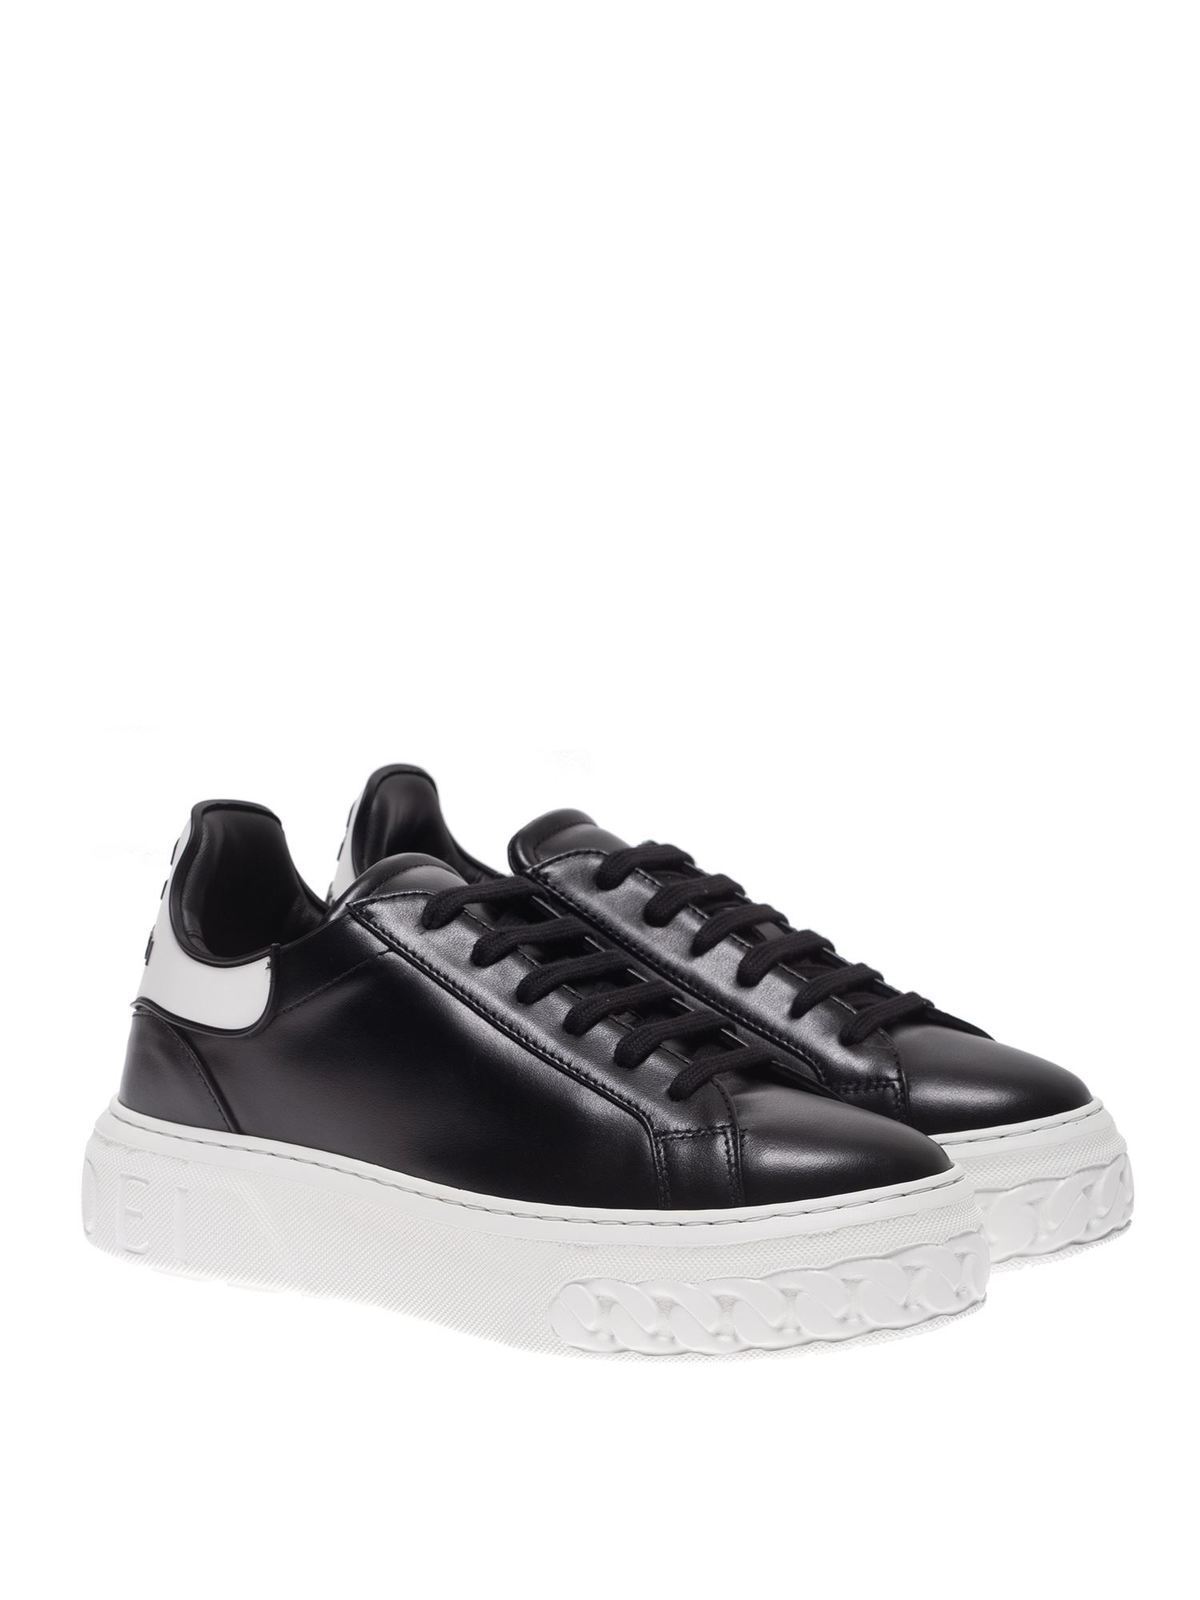 Casadei - Off-Road C Chain sneakers in black - trainers ...